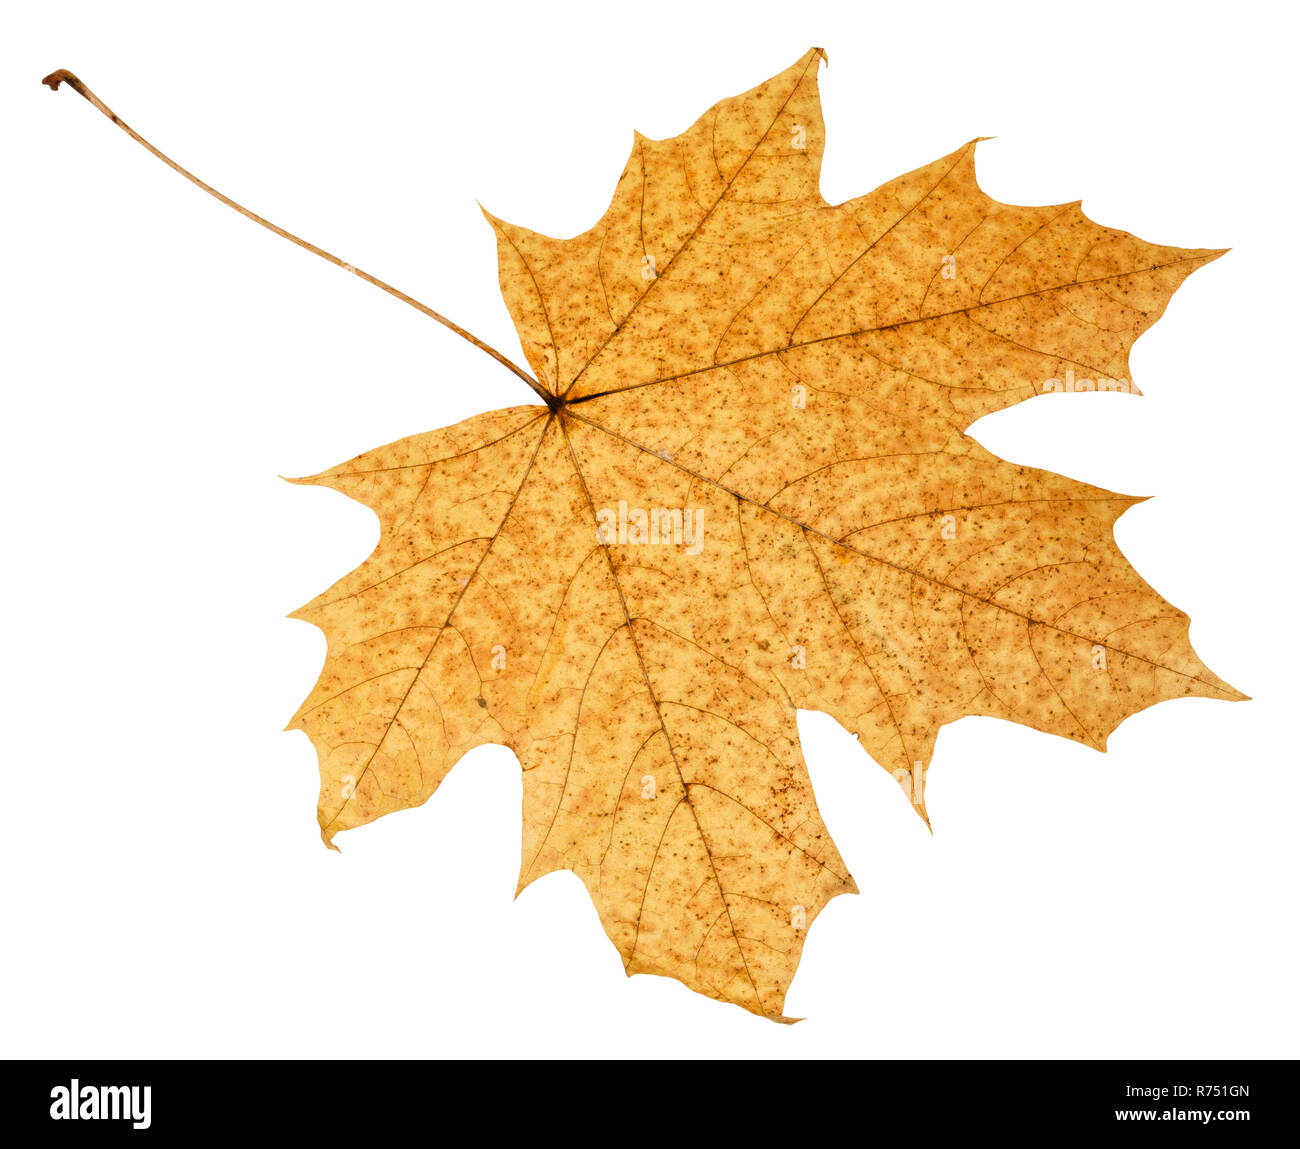 back side of fallen autumn leaf of acer tree Stock Photo